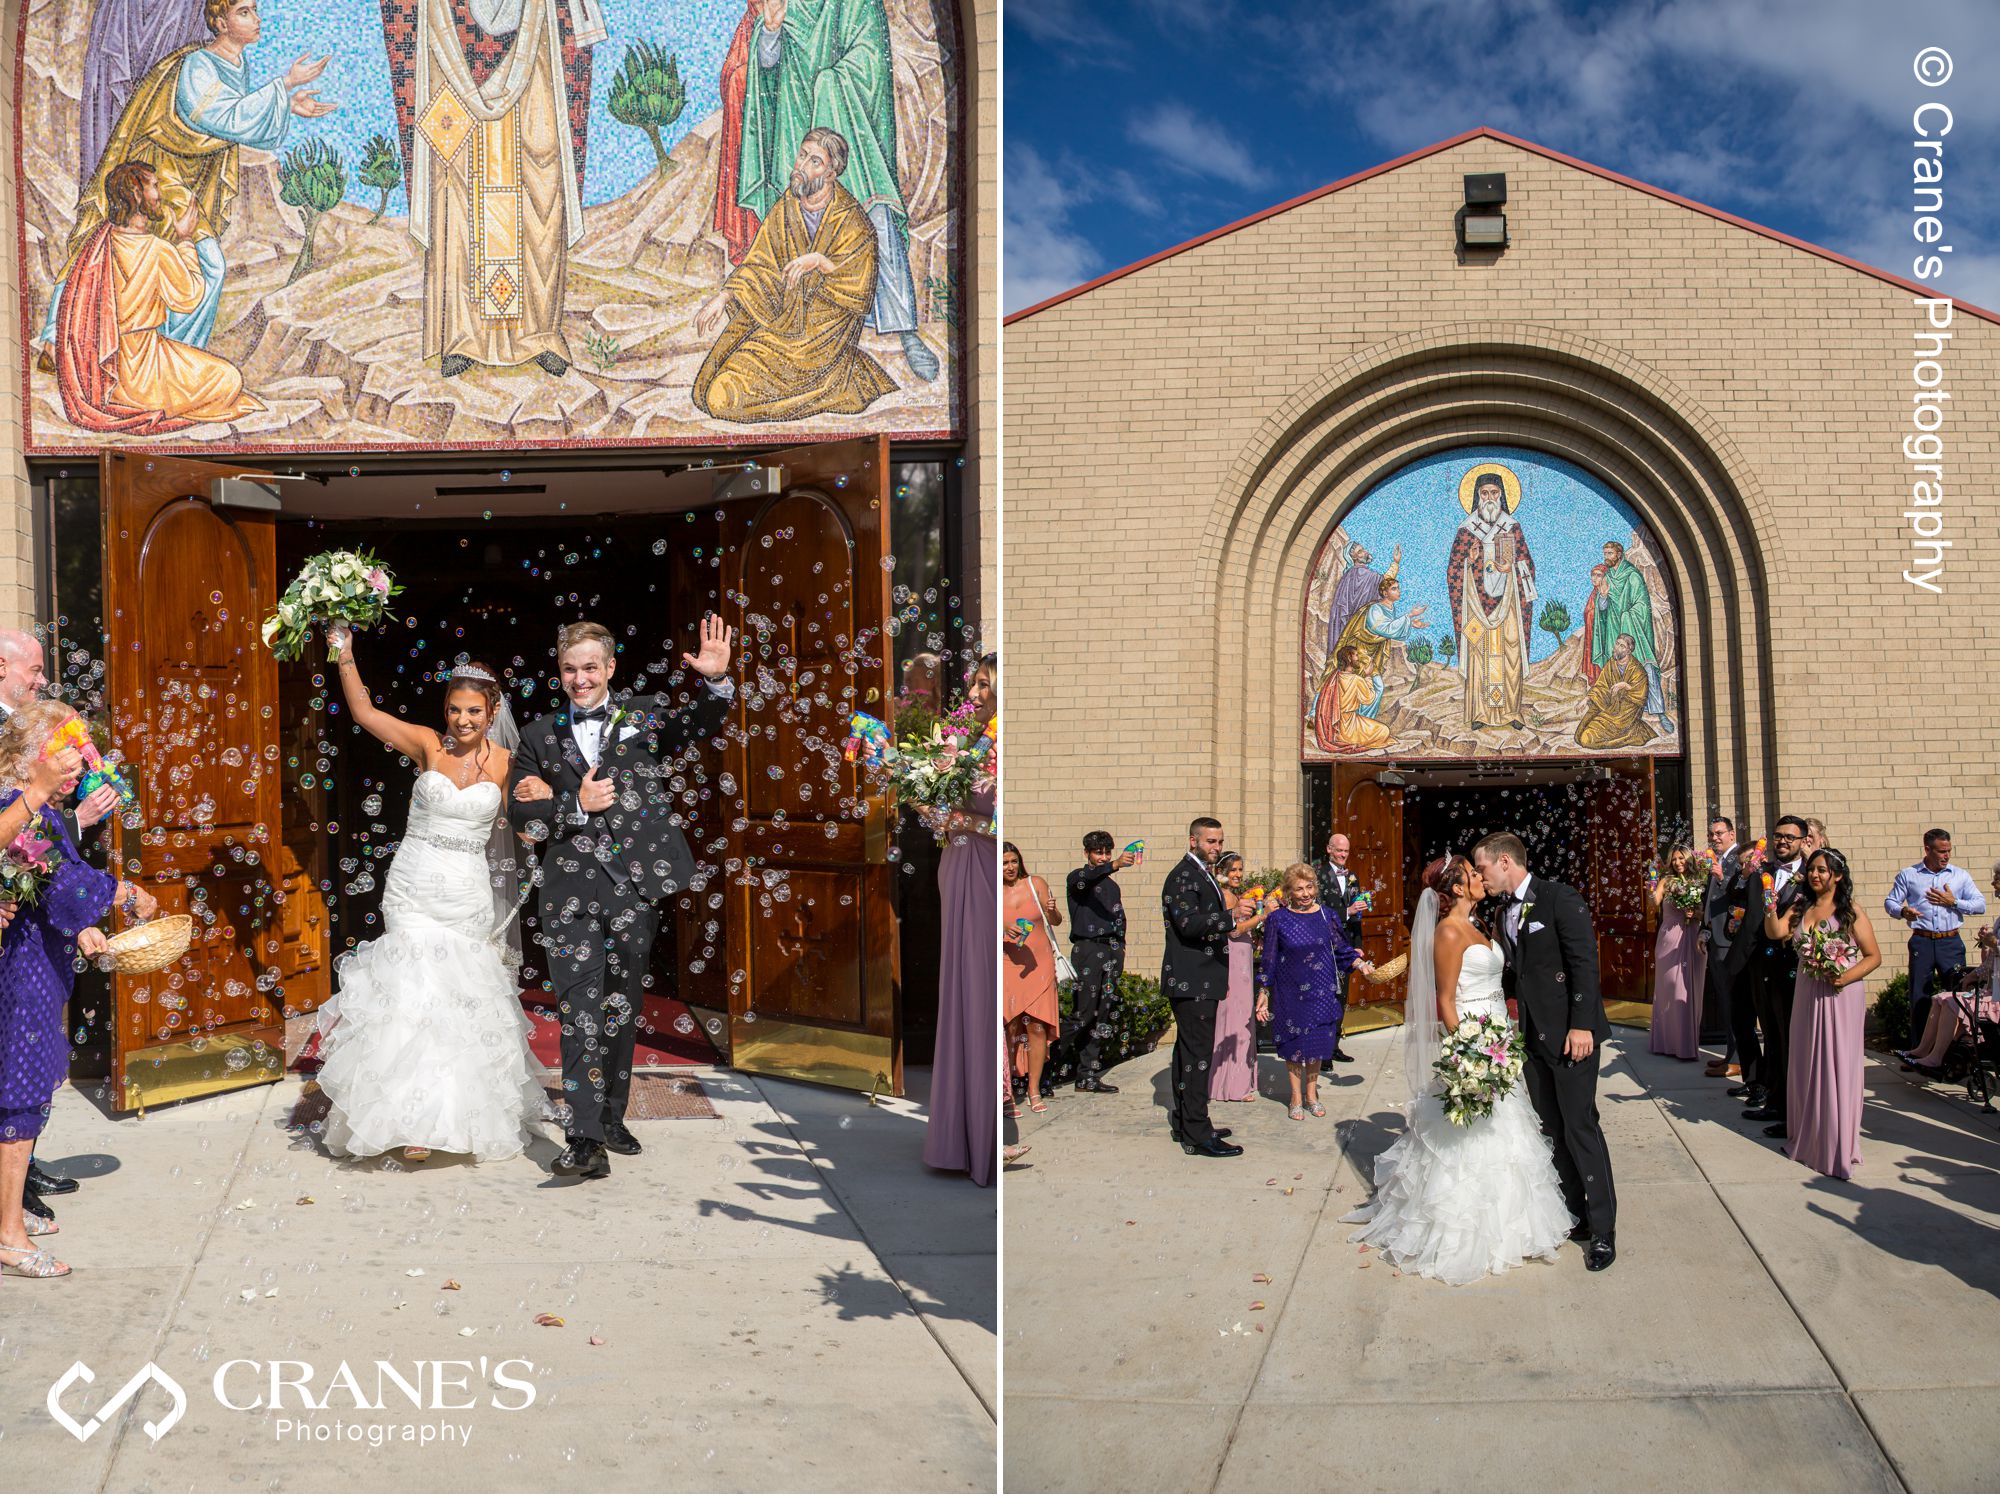 Bride and groom kiss at bubbles send-off after a wedding ceremony outside St. Nectarios in Palatine